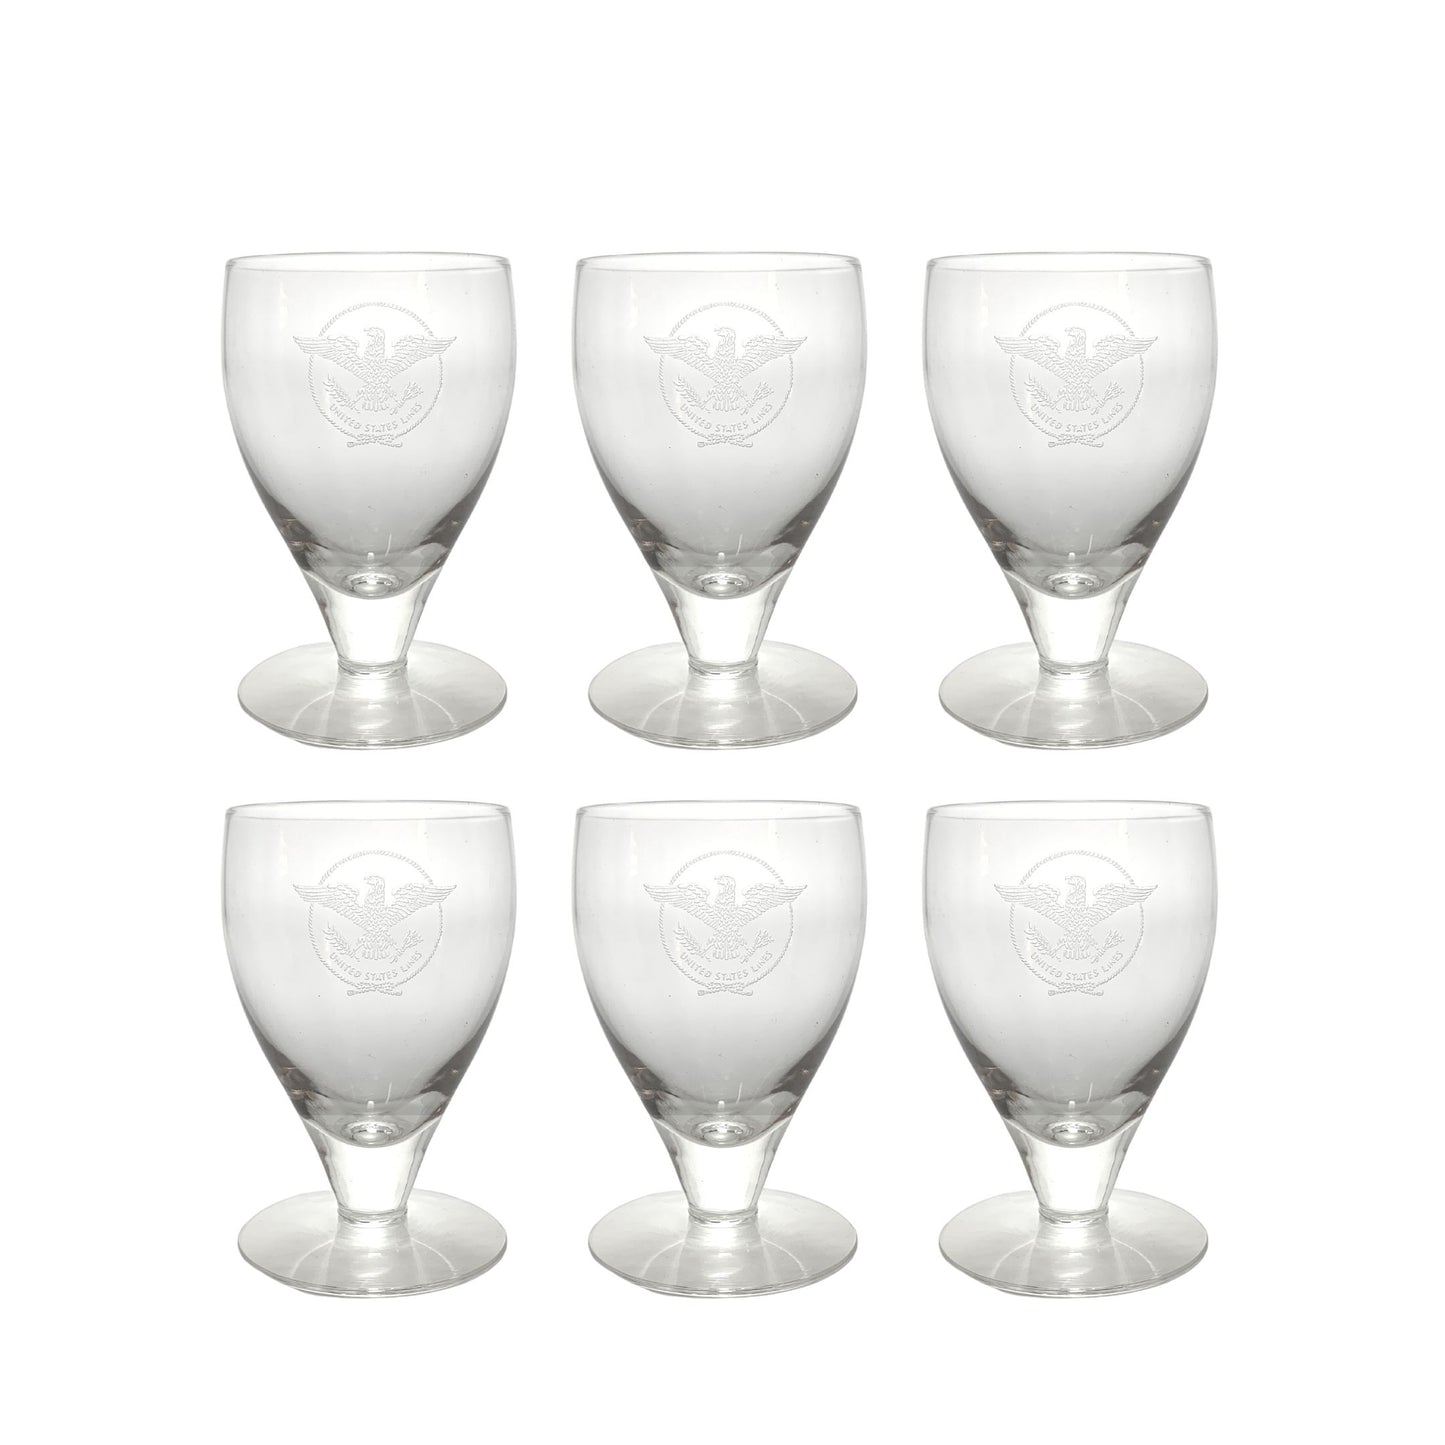 SS United States Crystal Wine Glasses (6)